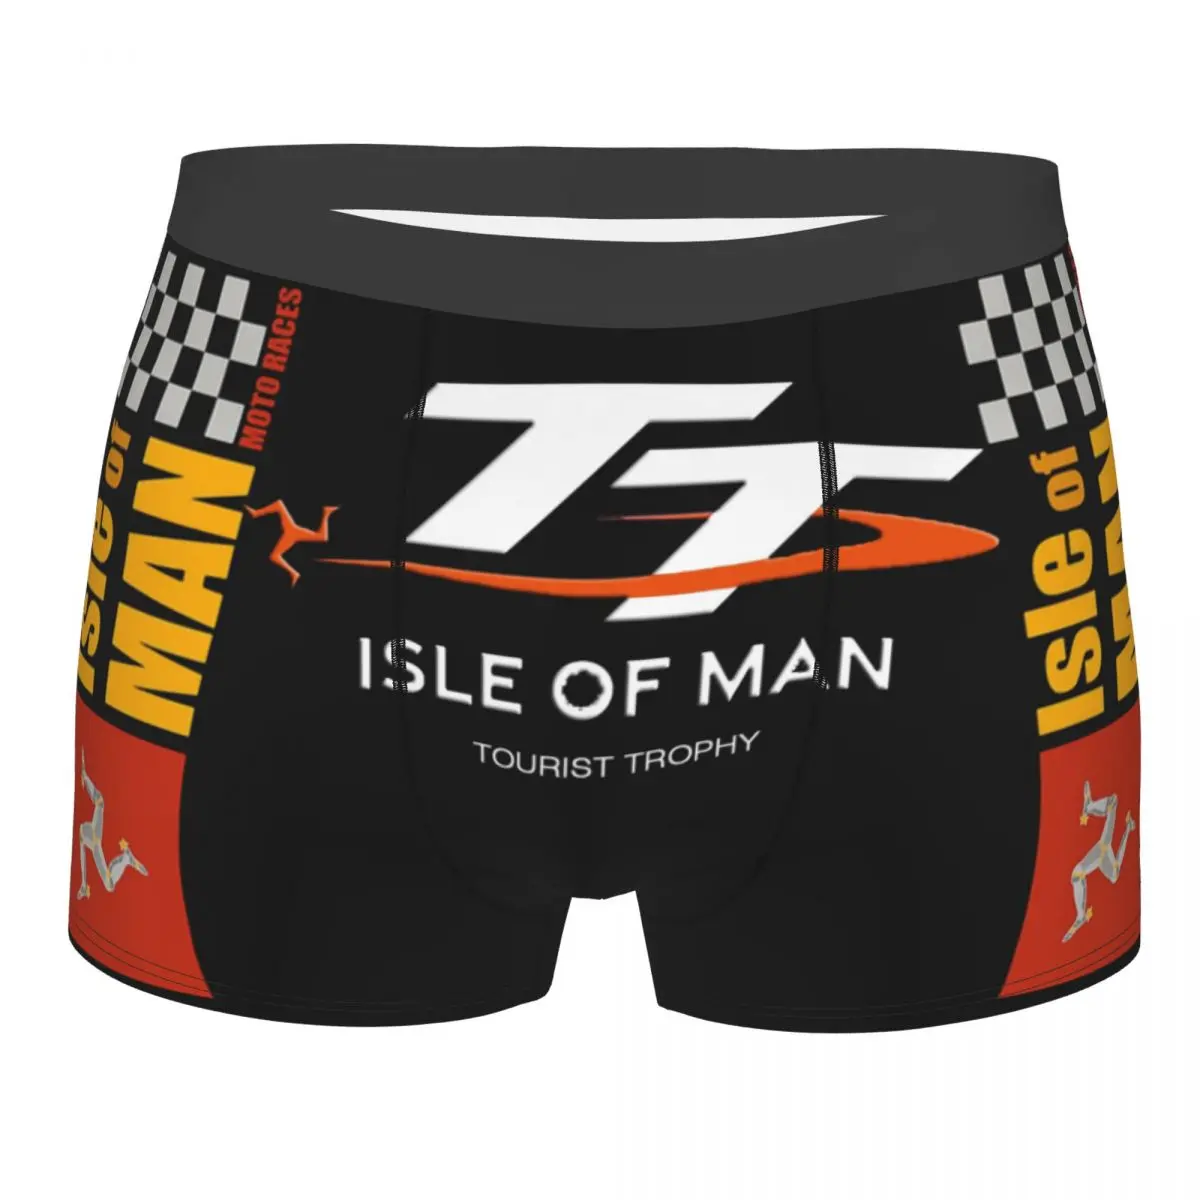 Isle Of Man TT Races Man's Boxer Briefs Underwear Highly Breathable High Quality Gift Idea